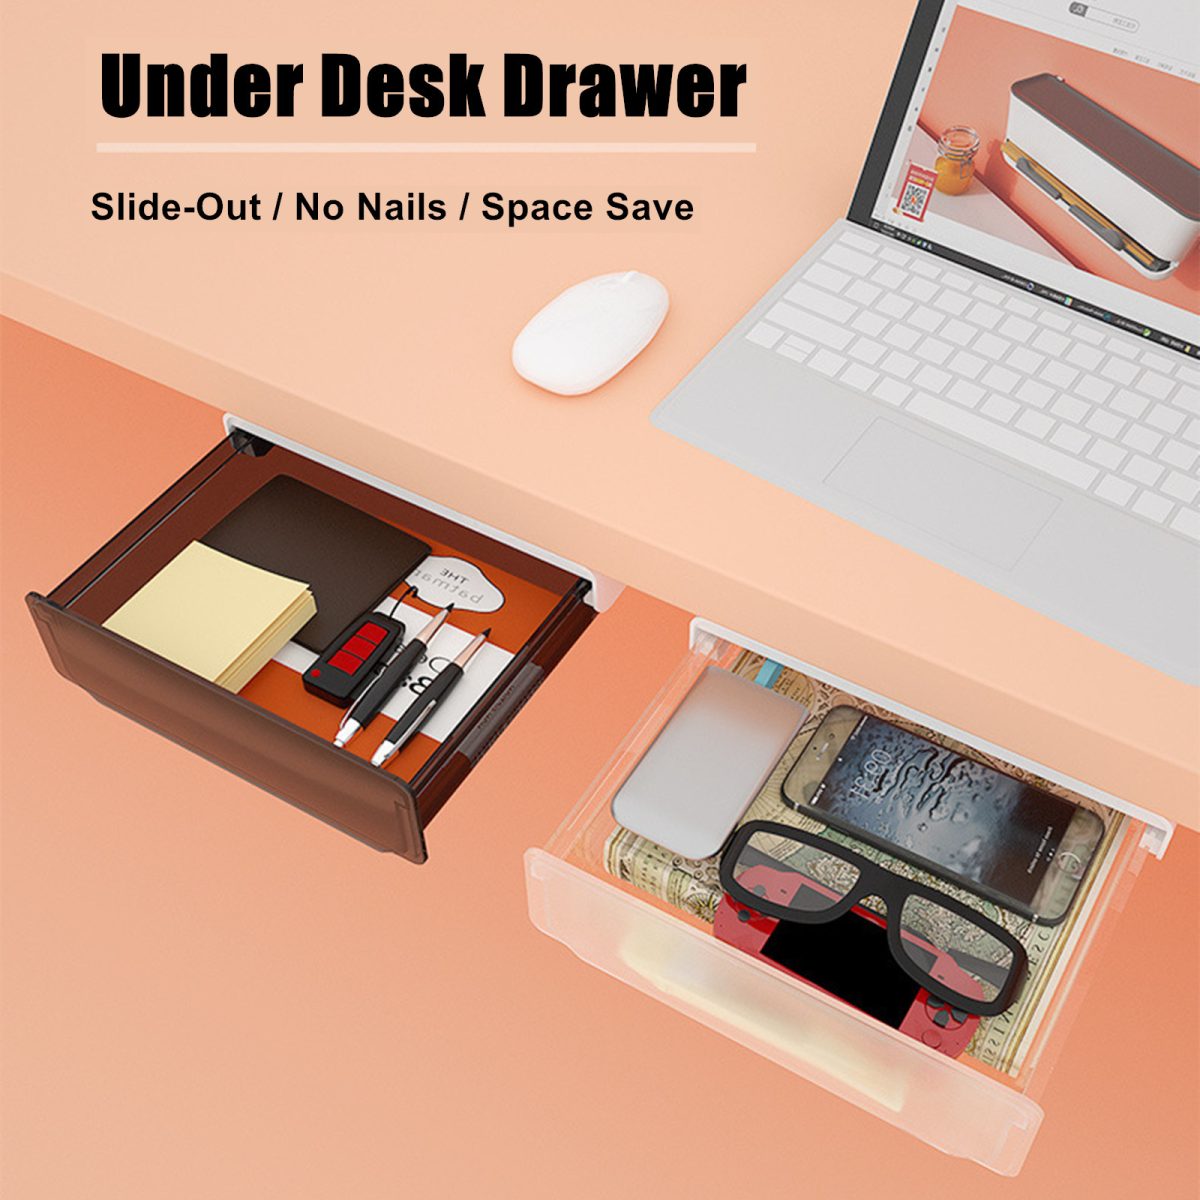 Under Desk Drawer Slide-out Large Office Organizers and Storage Drawers – Black, Large